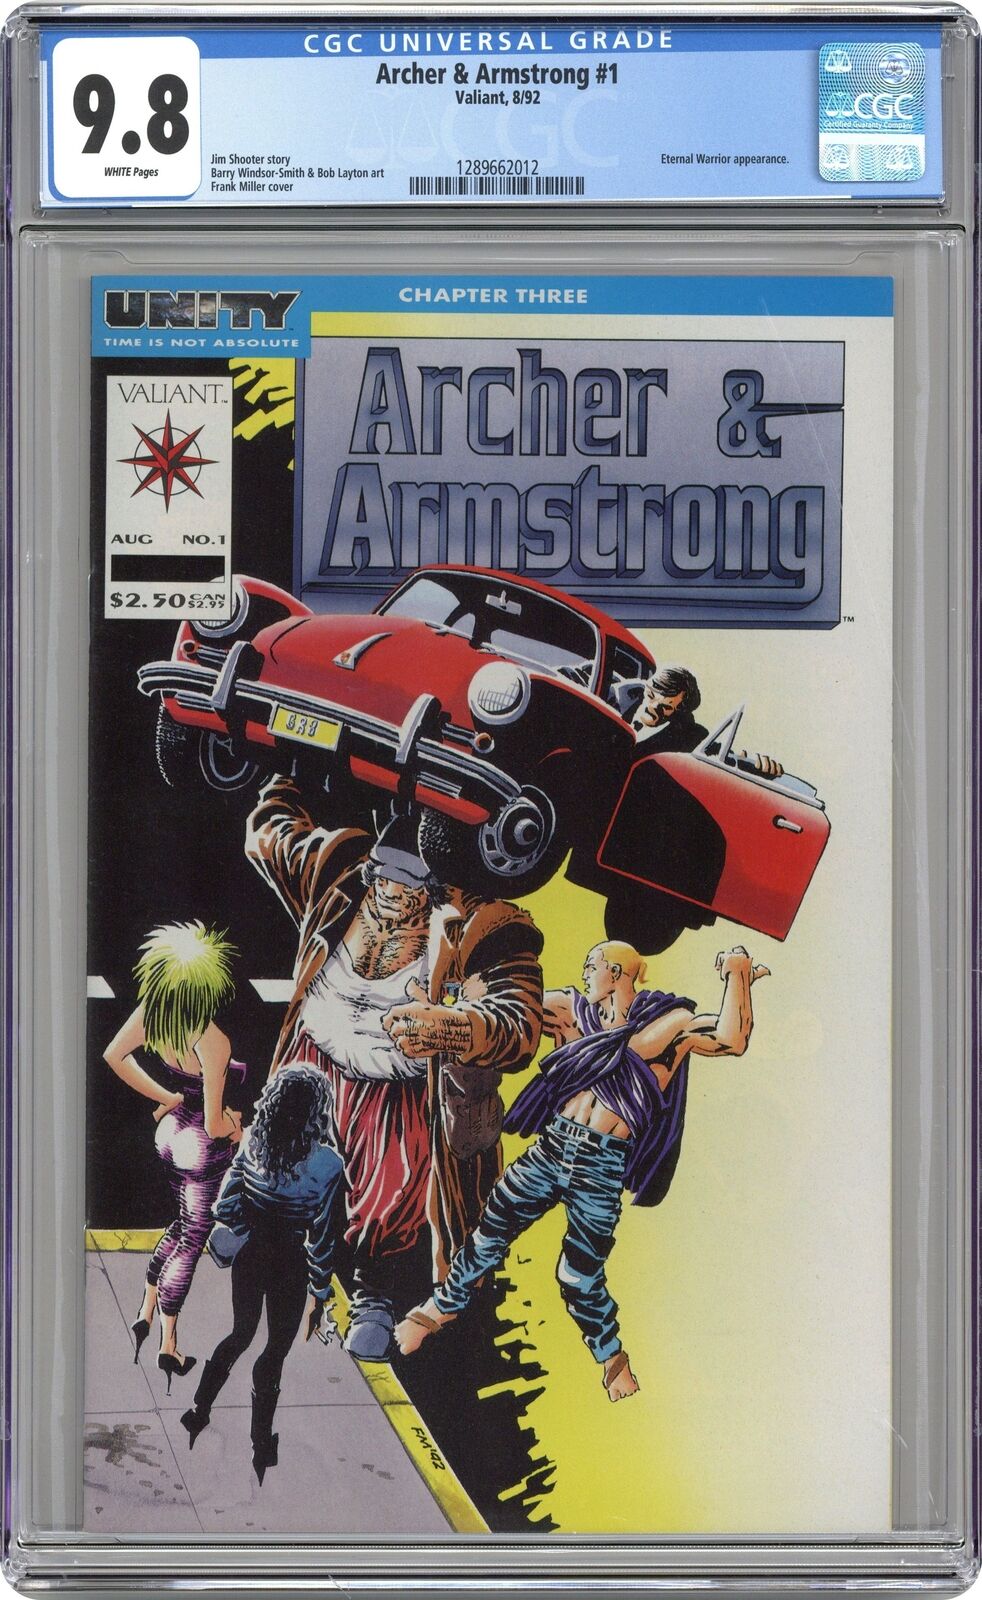 Archer and Armstrong #1 CGC 9.8 1992 1289662012